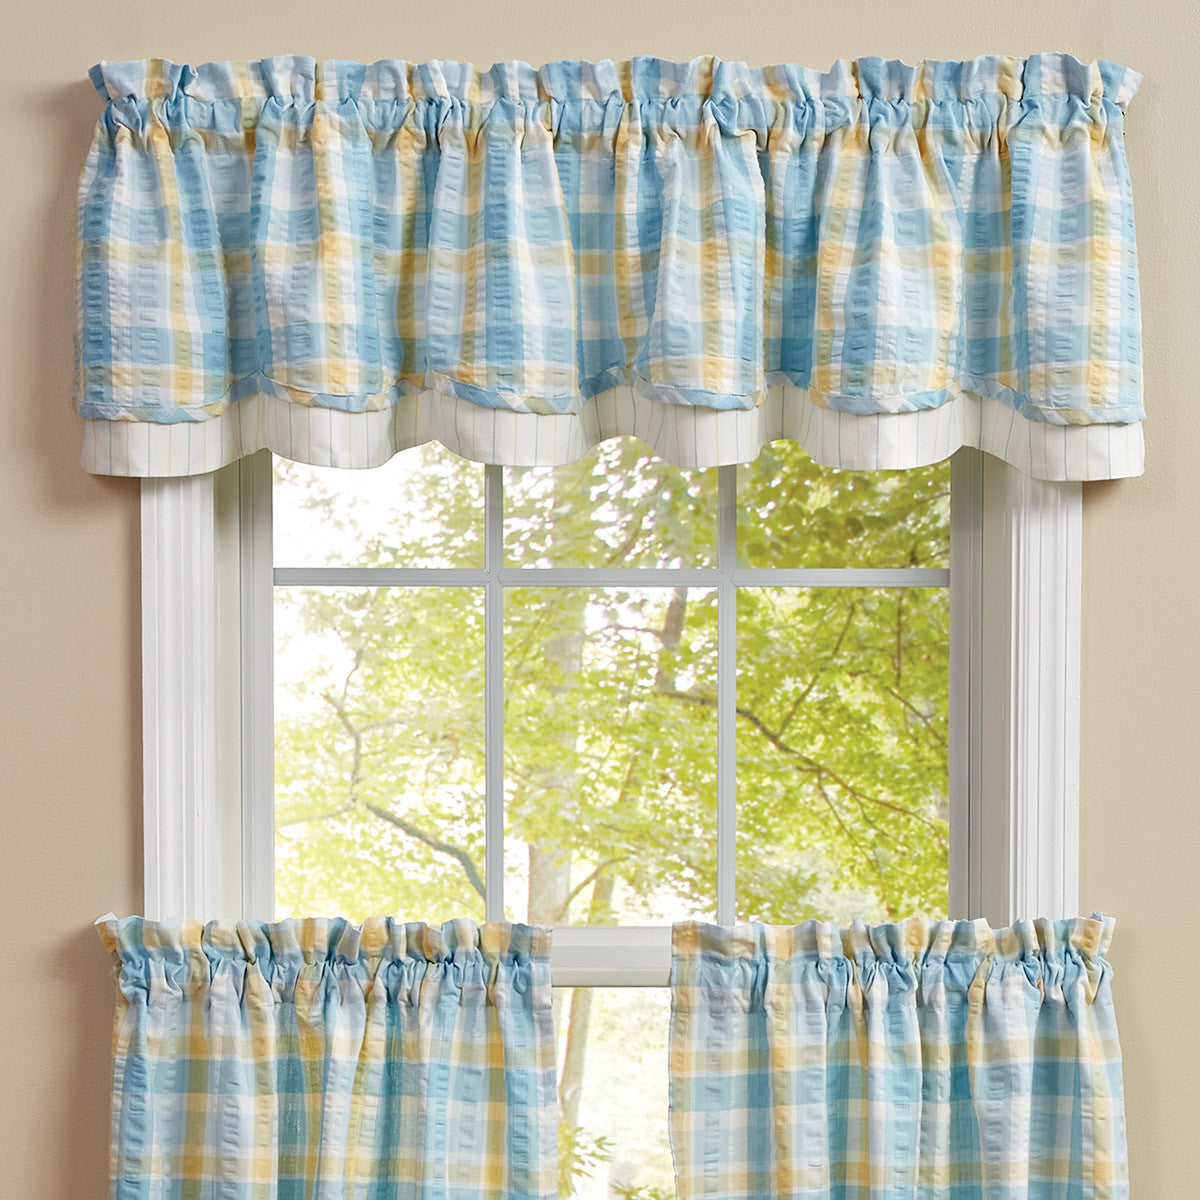 Forget Me Not Valance - Lined Layered 72x16 Park Designs